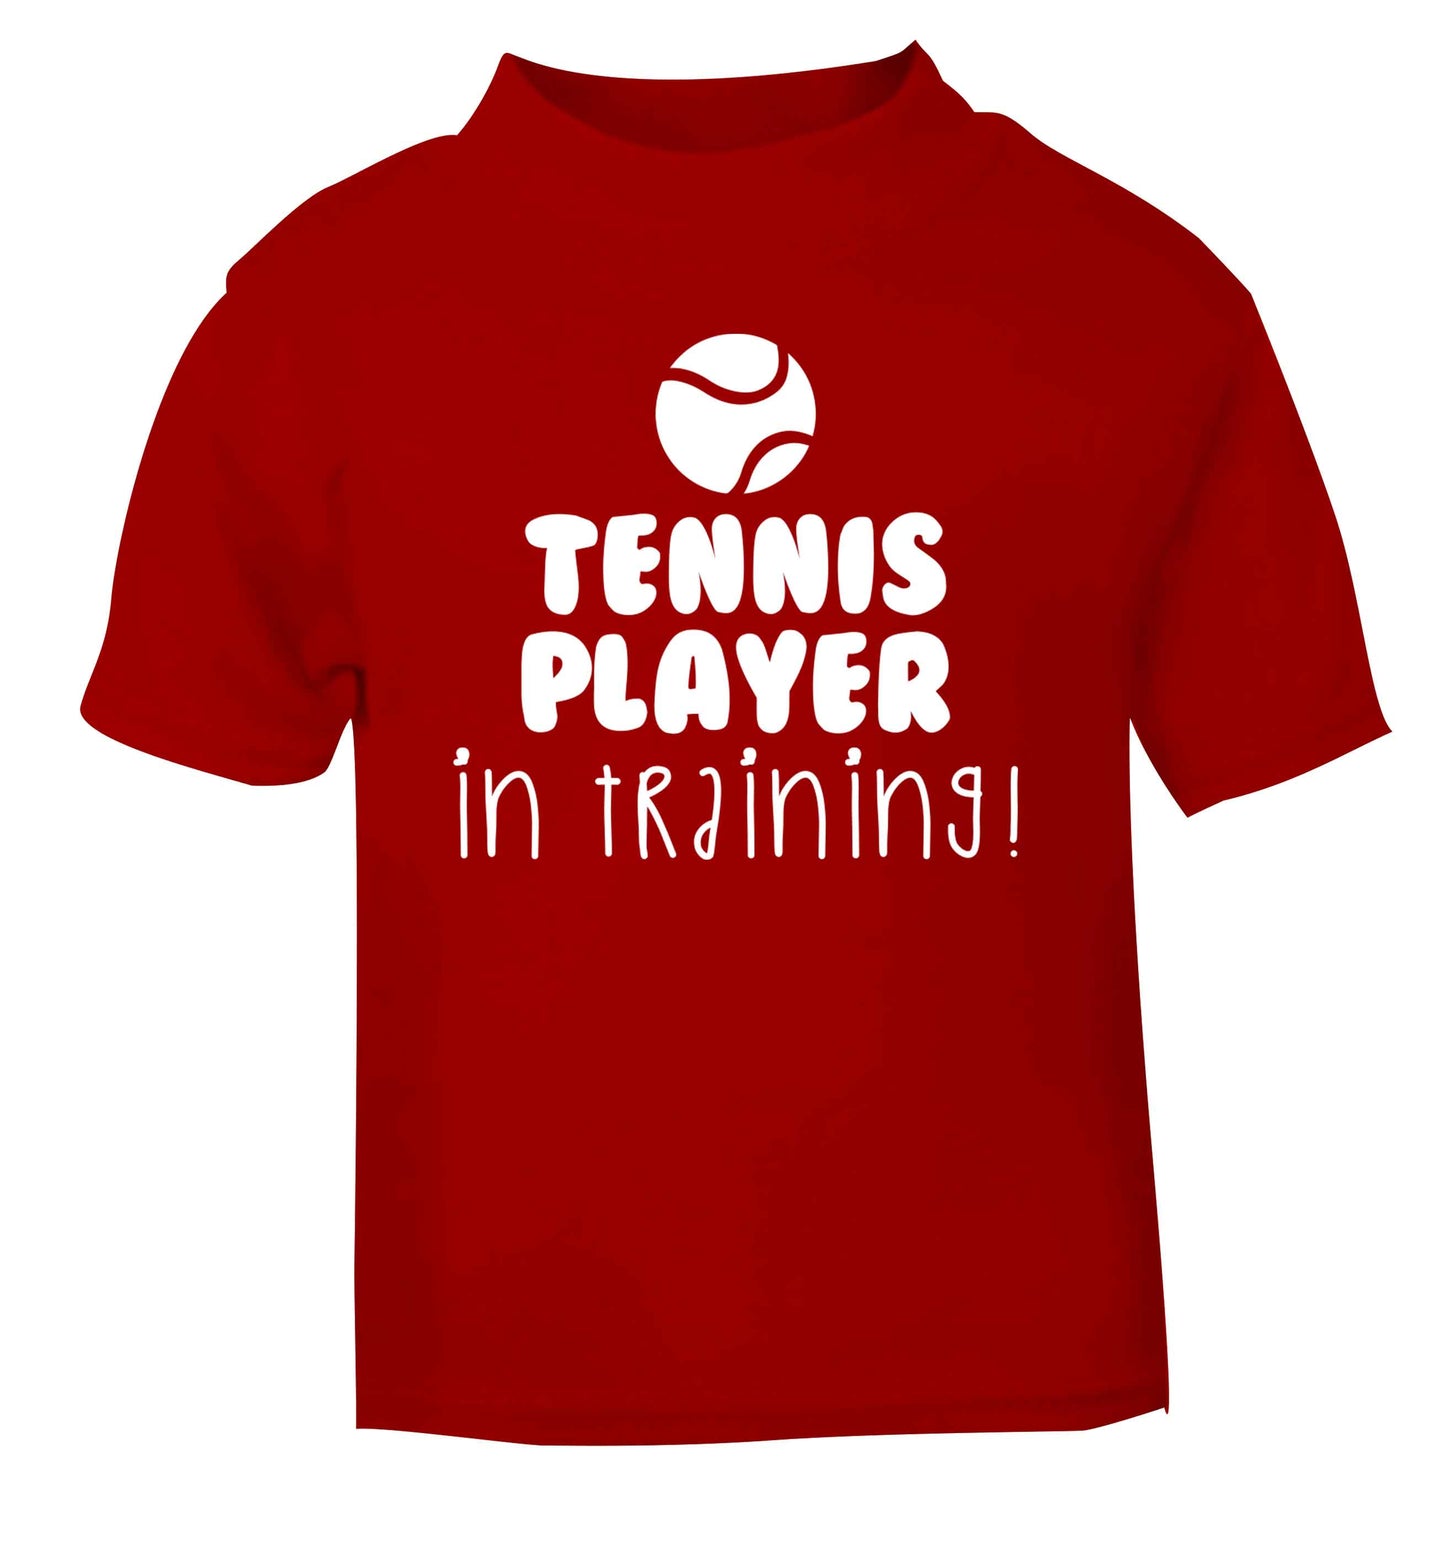 Tennis player in training red Baby Toddler Tshirt 2 Years